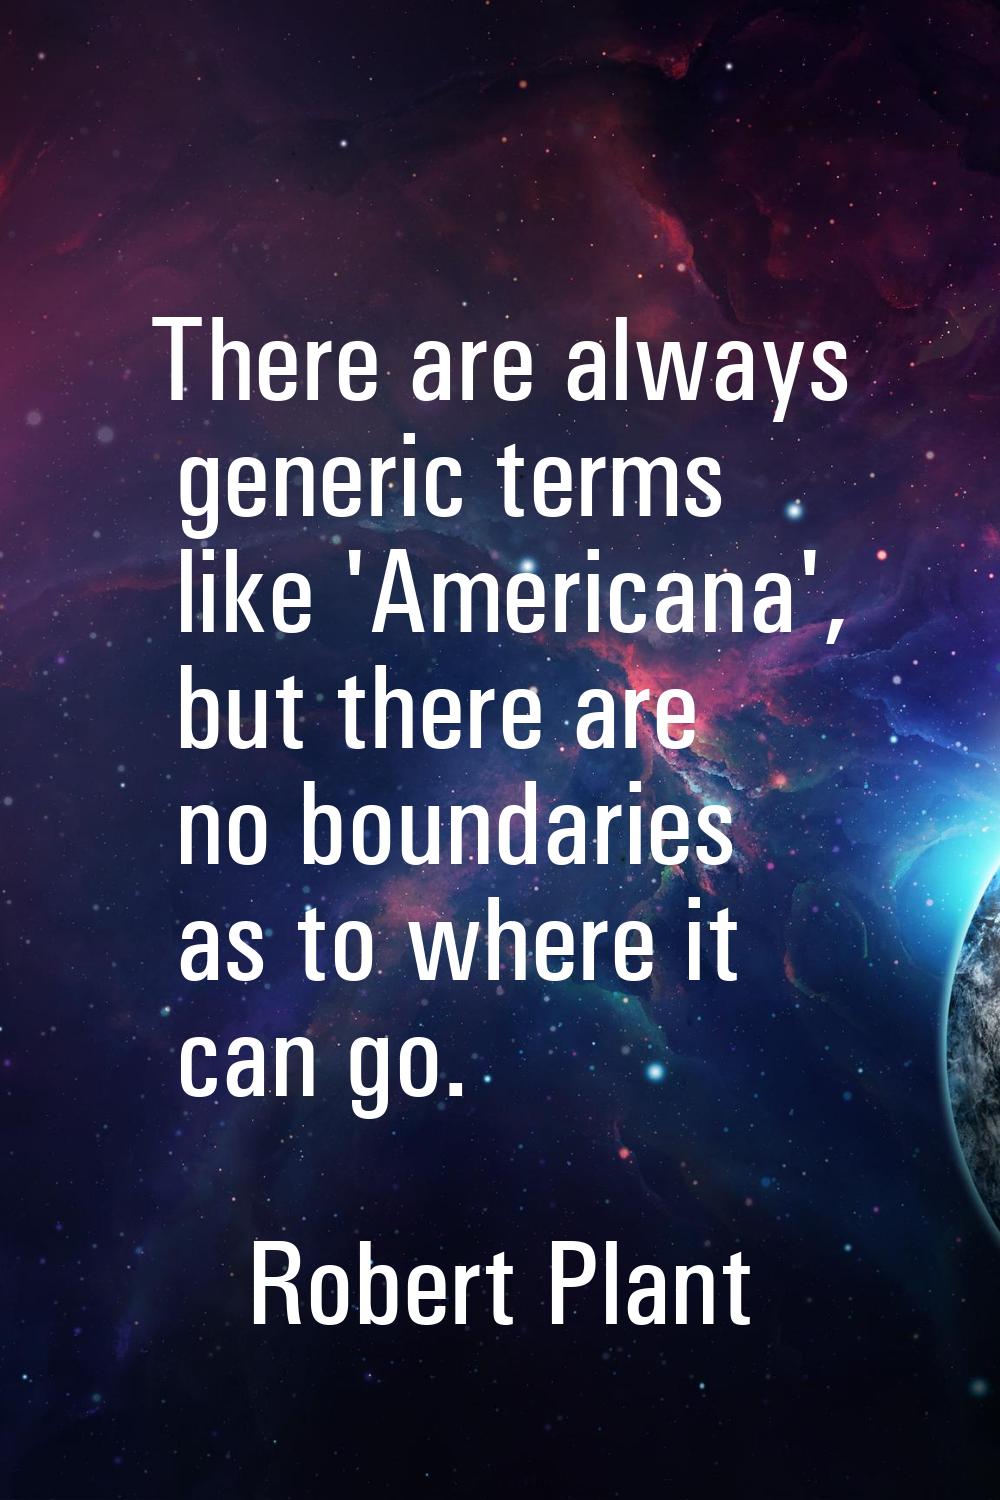 There are always generic terms like 'Americana', but there are no boundaries as to where it can go.